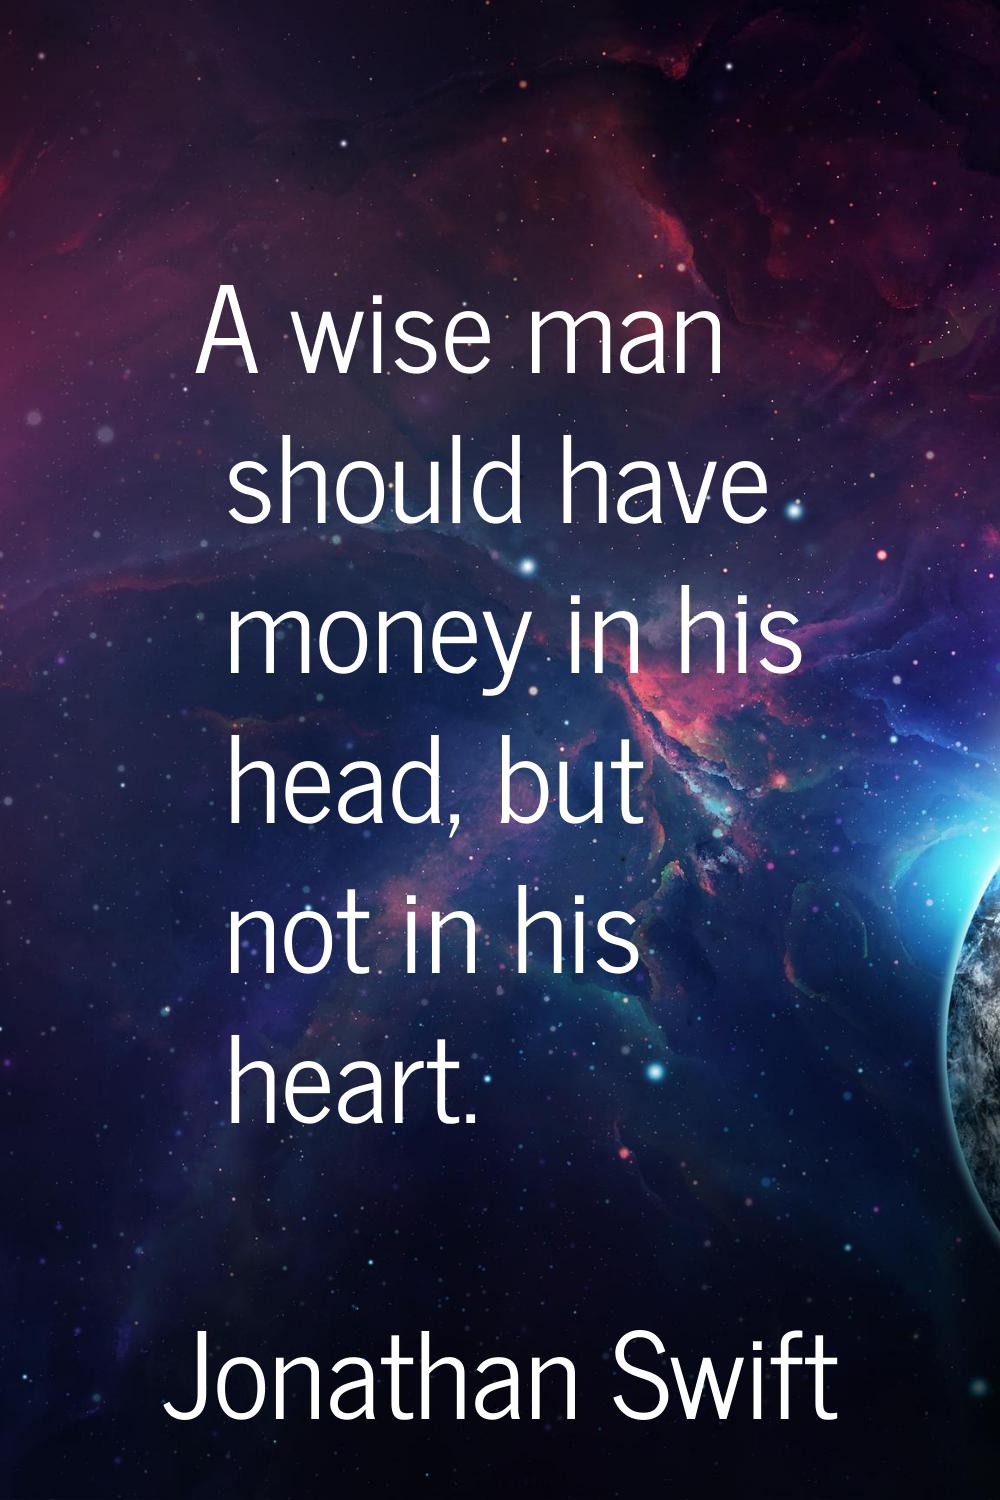 A wise man should have money in his head, but not in his heart.